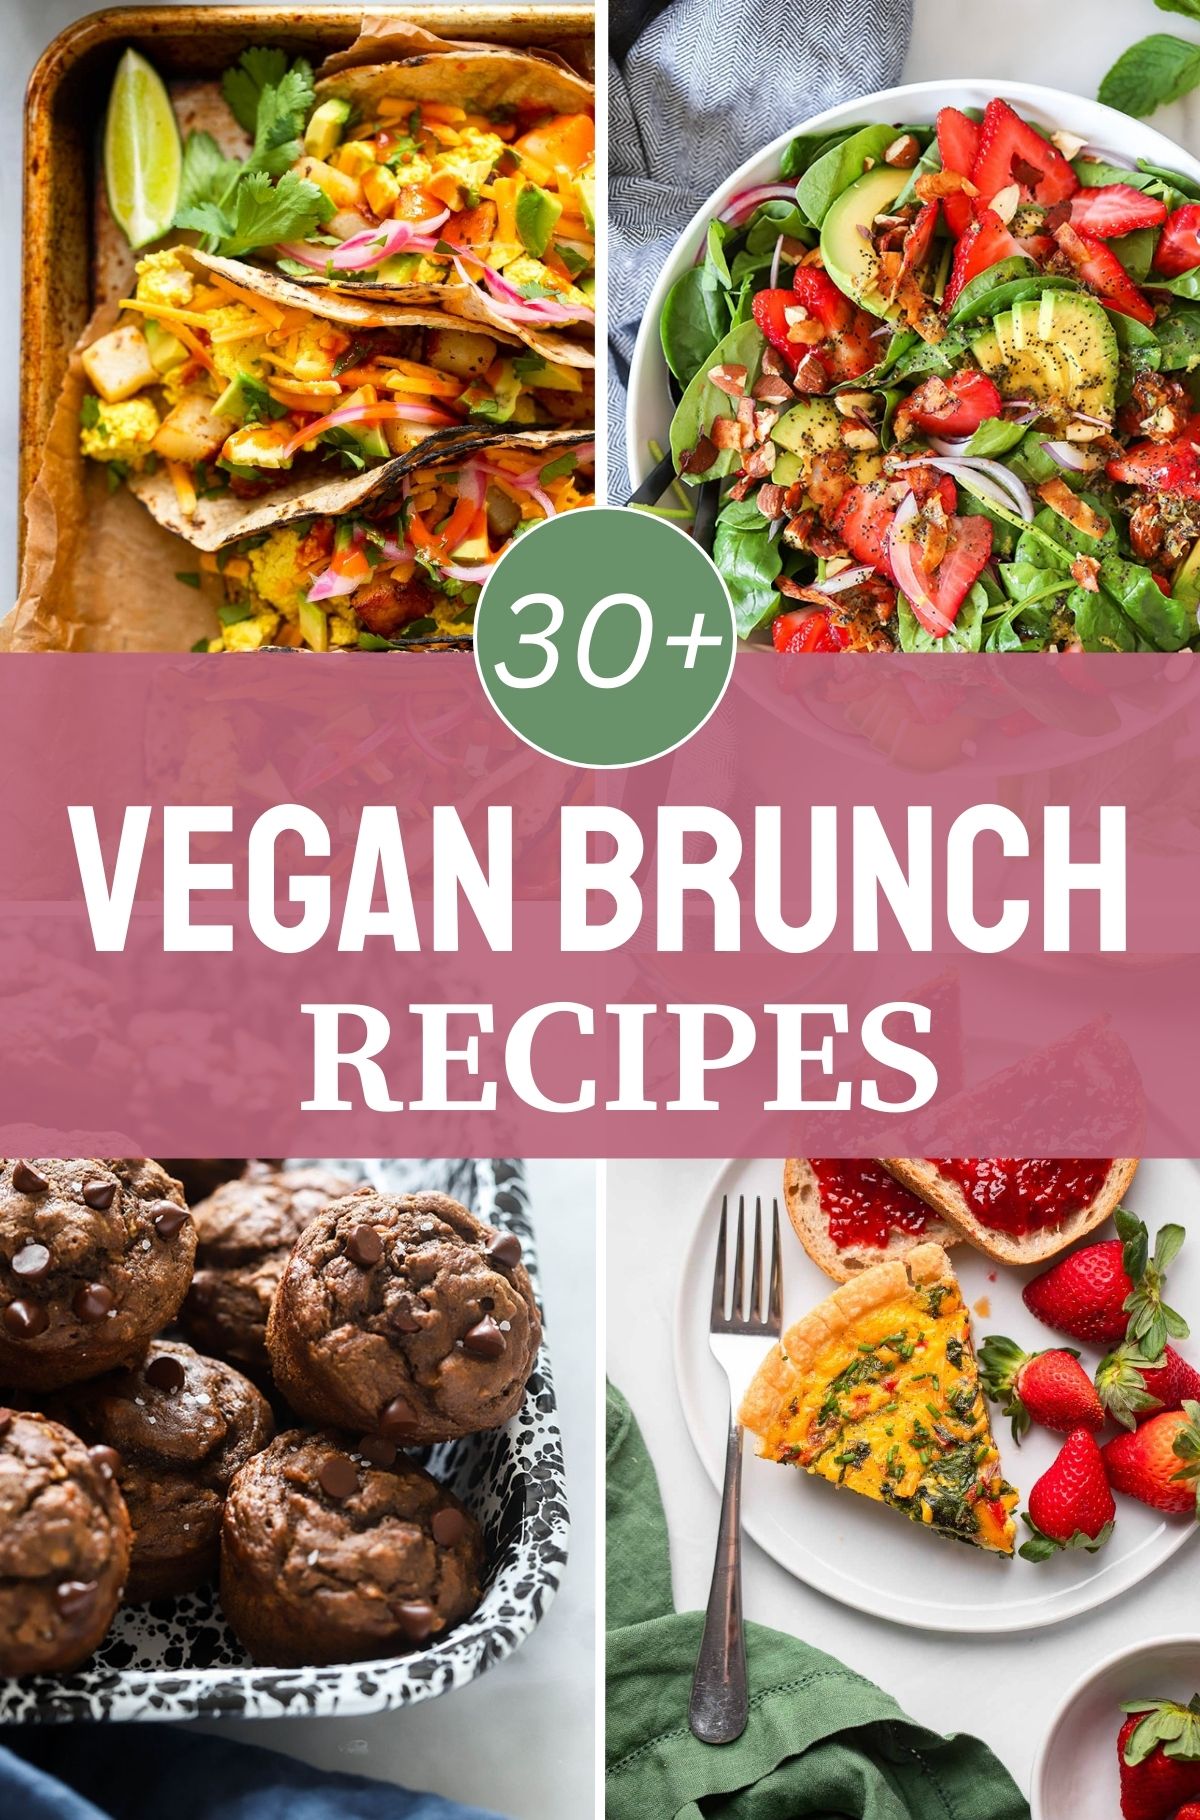 vegan brunch recipe collage with text overlay.